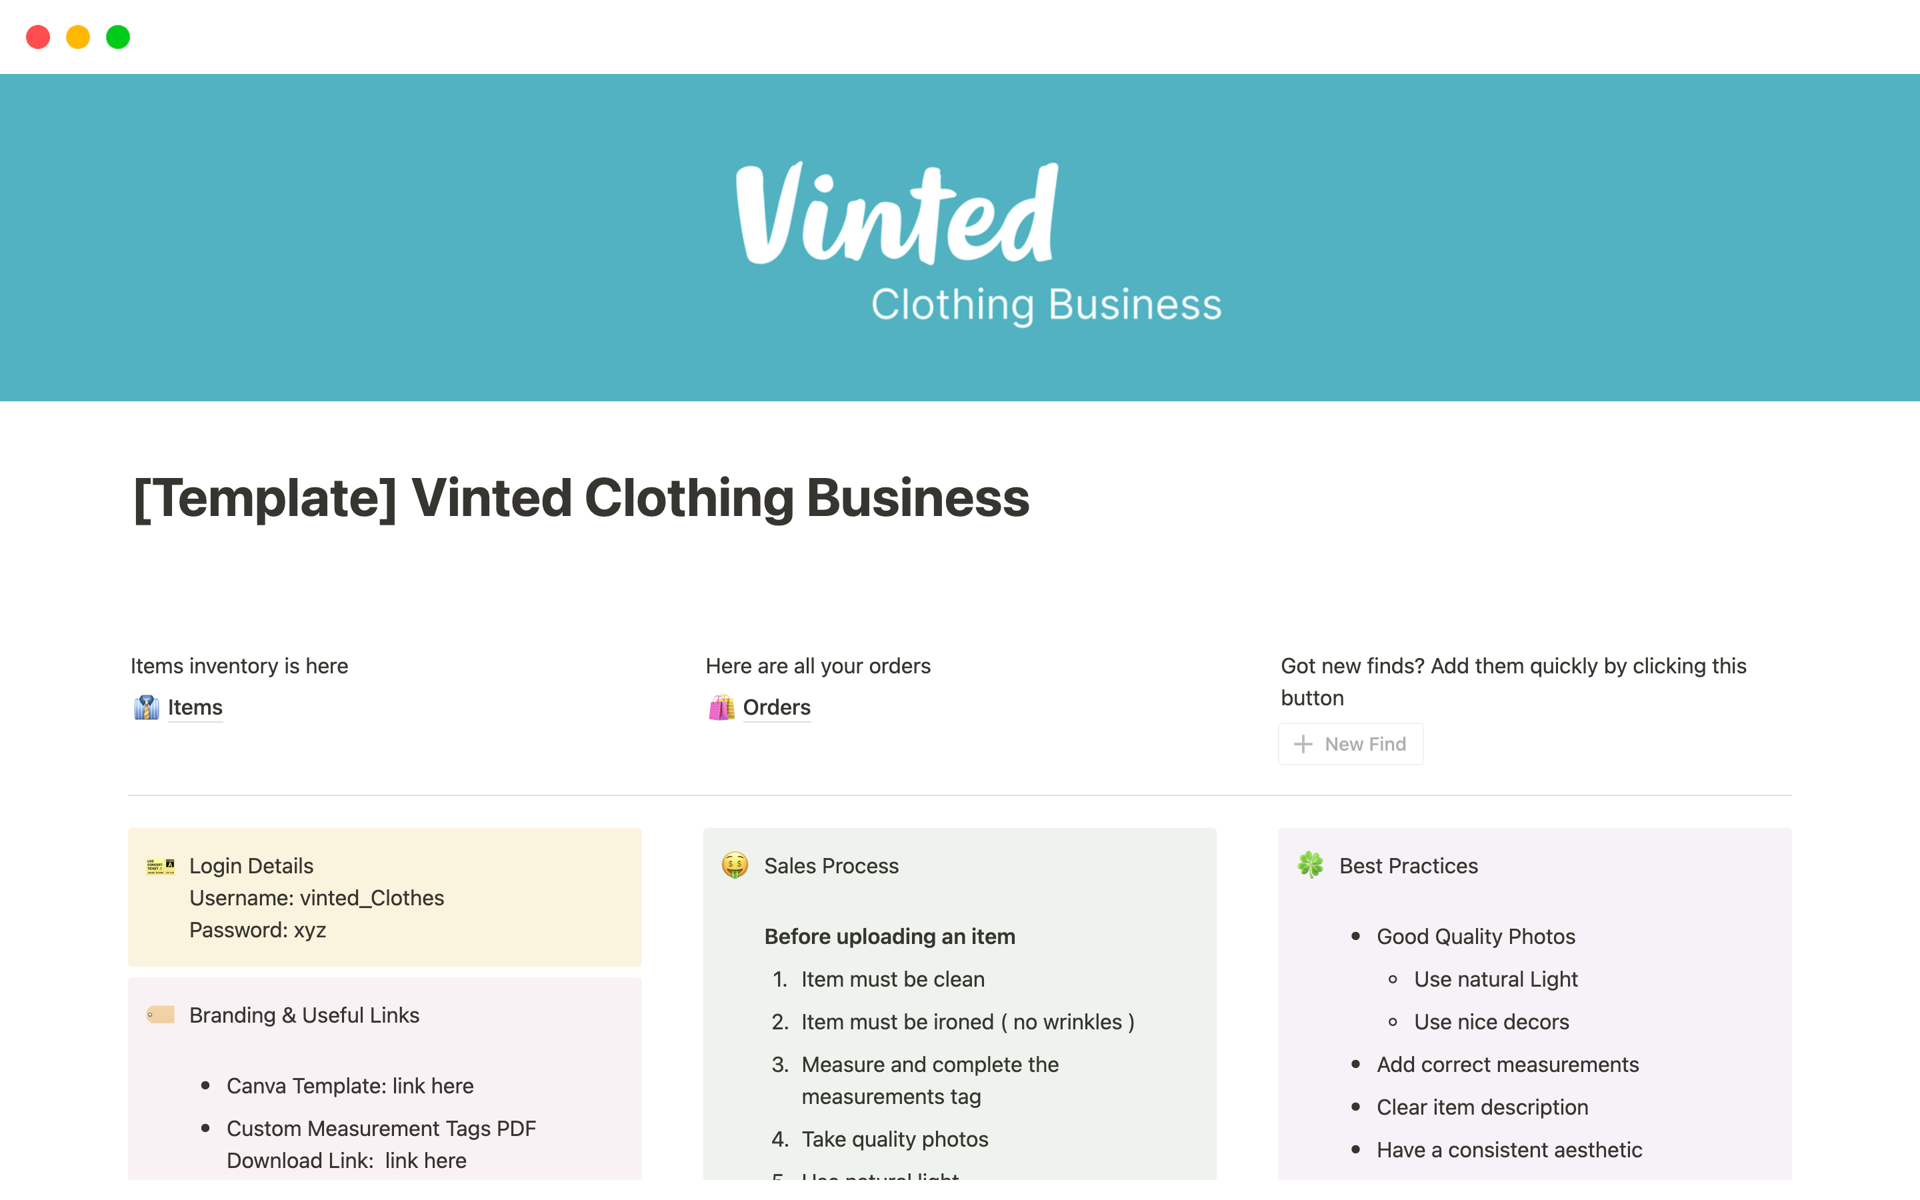 Vinted Clothing Business